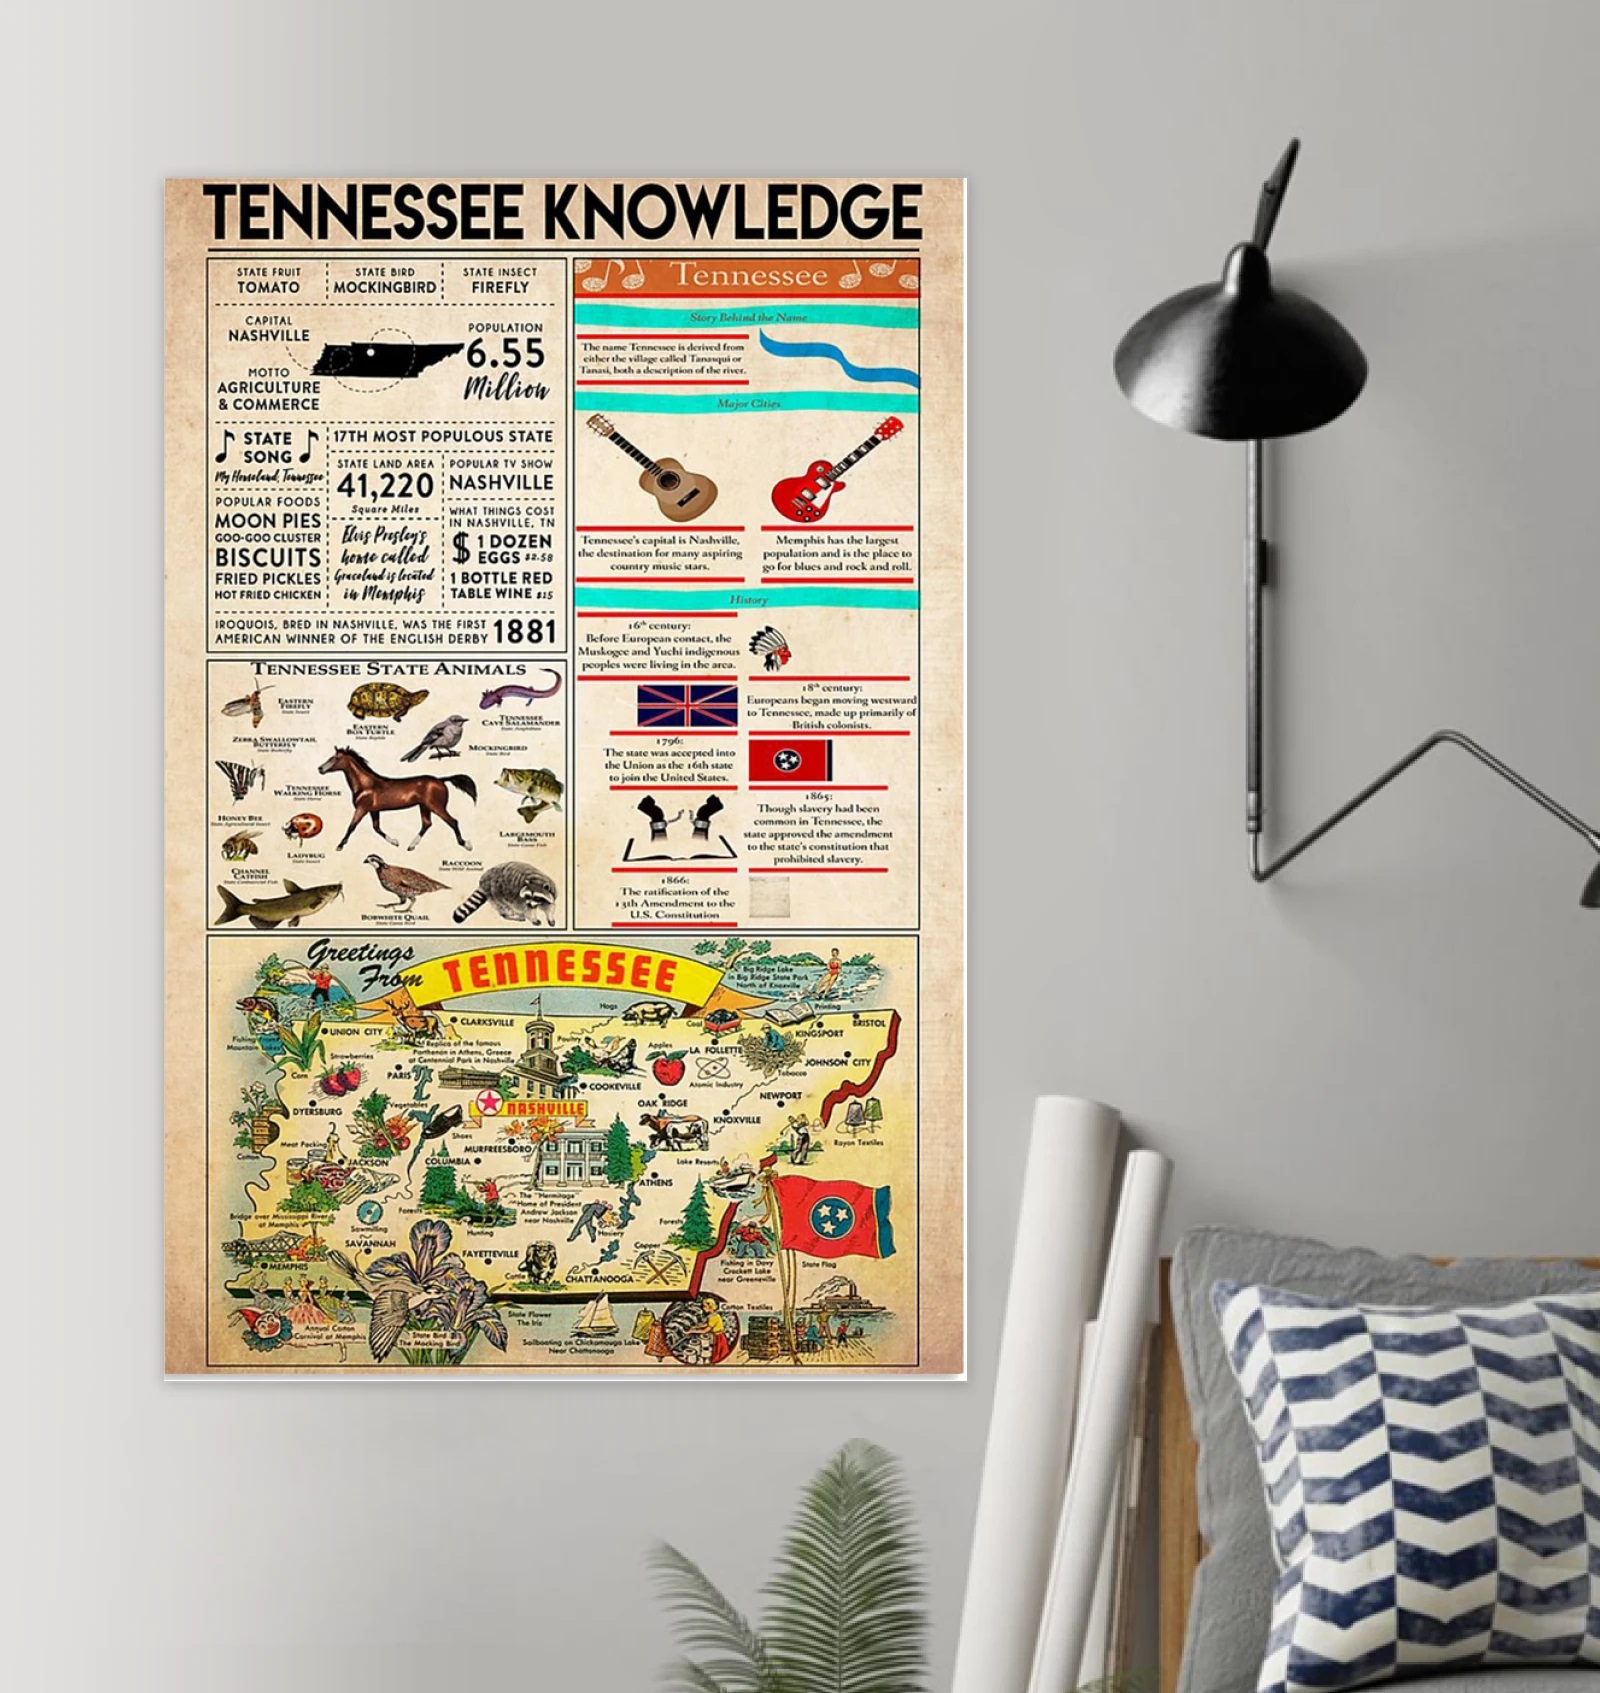 Tennessee Knowledge Poster - tml